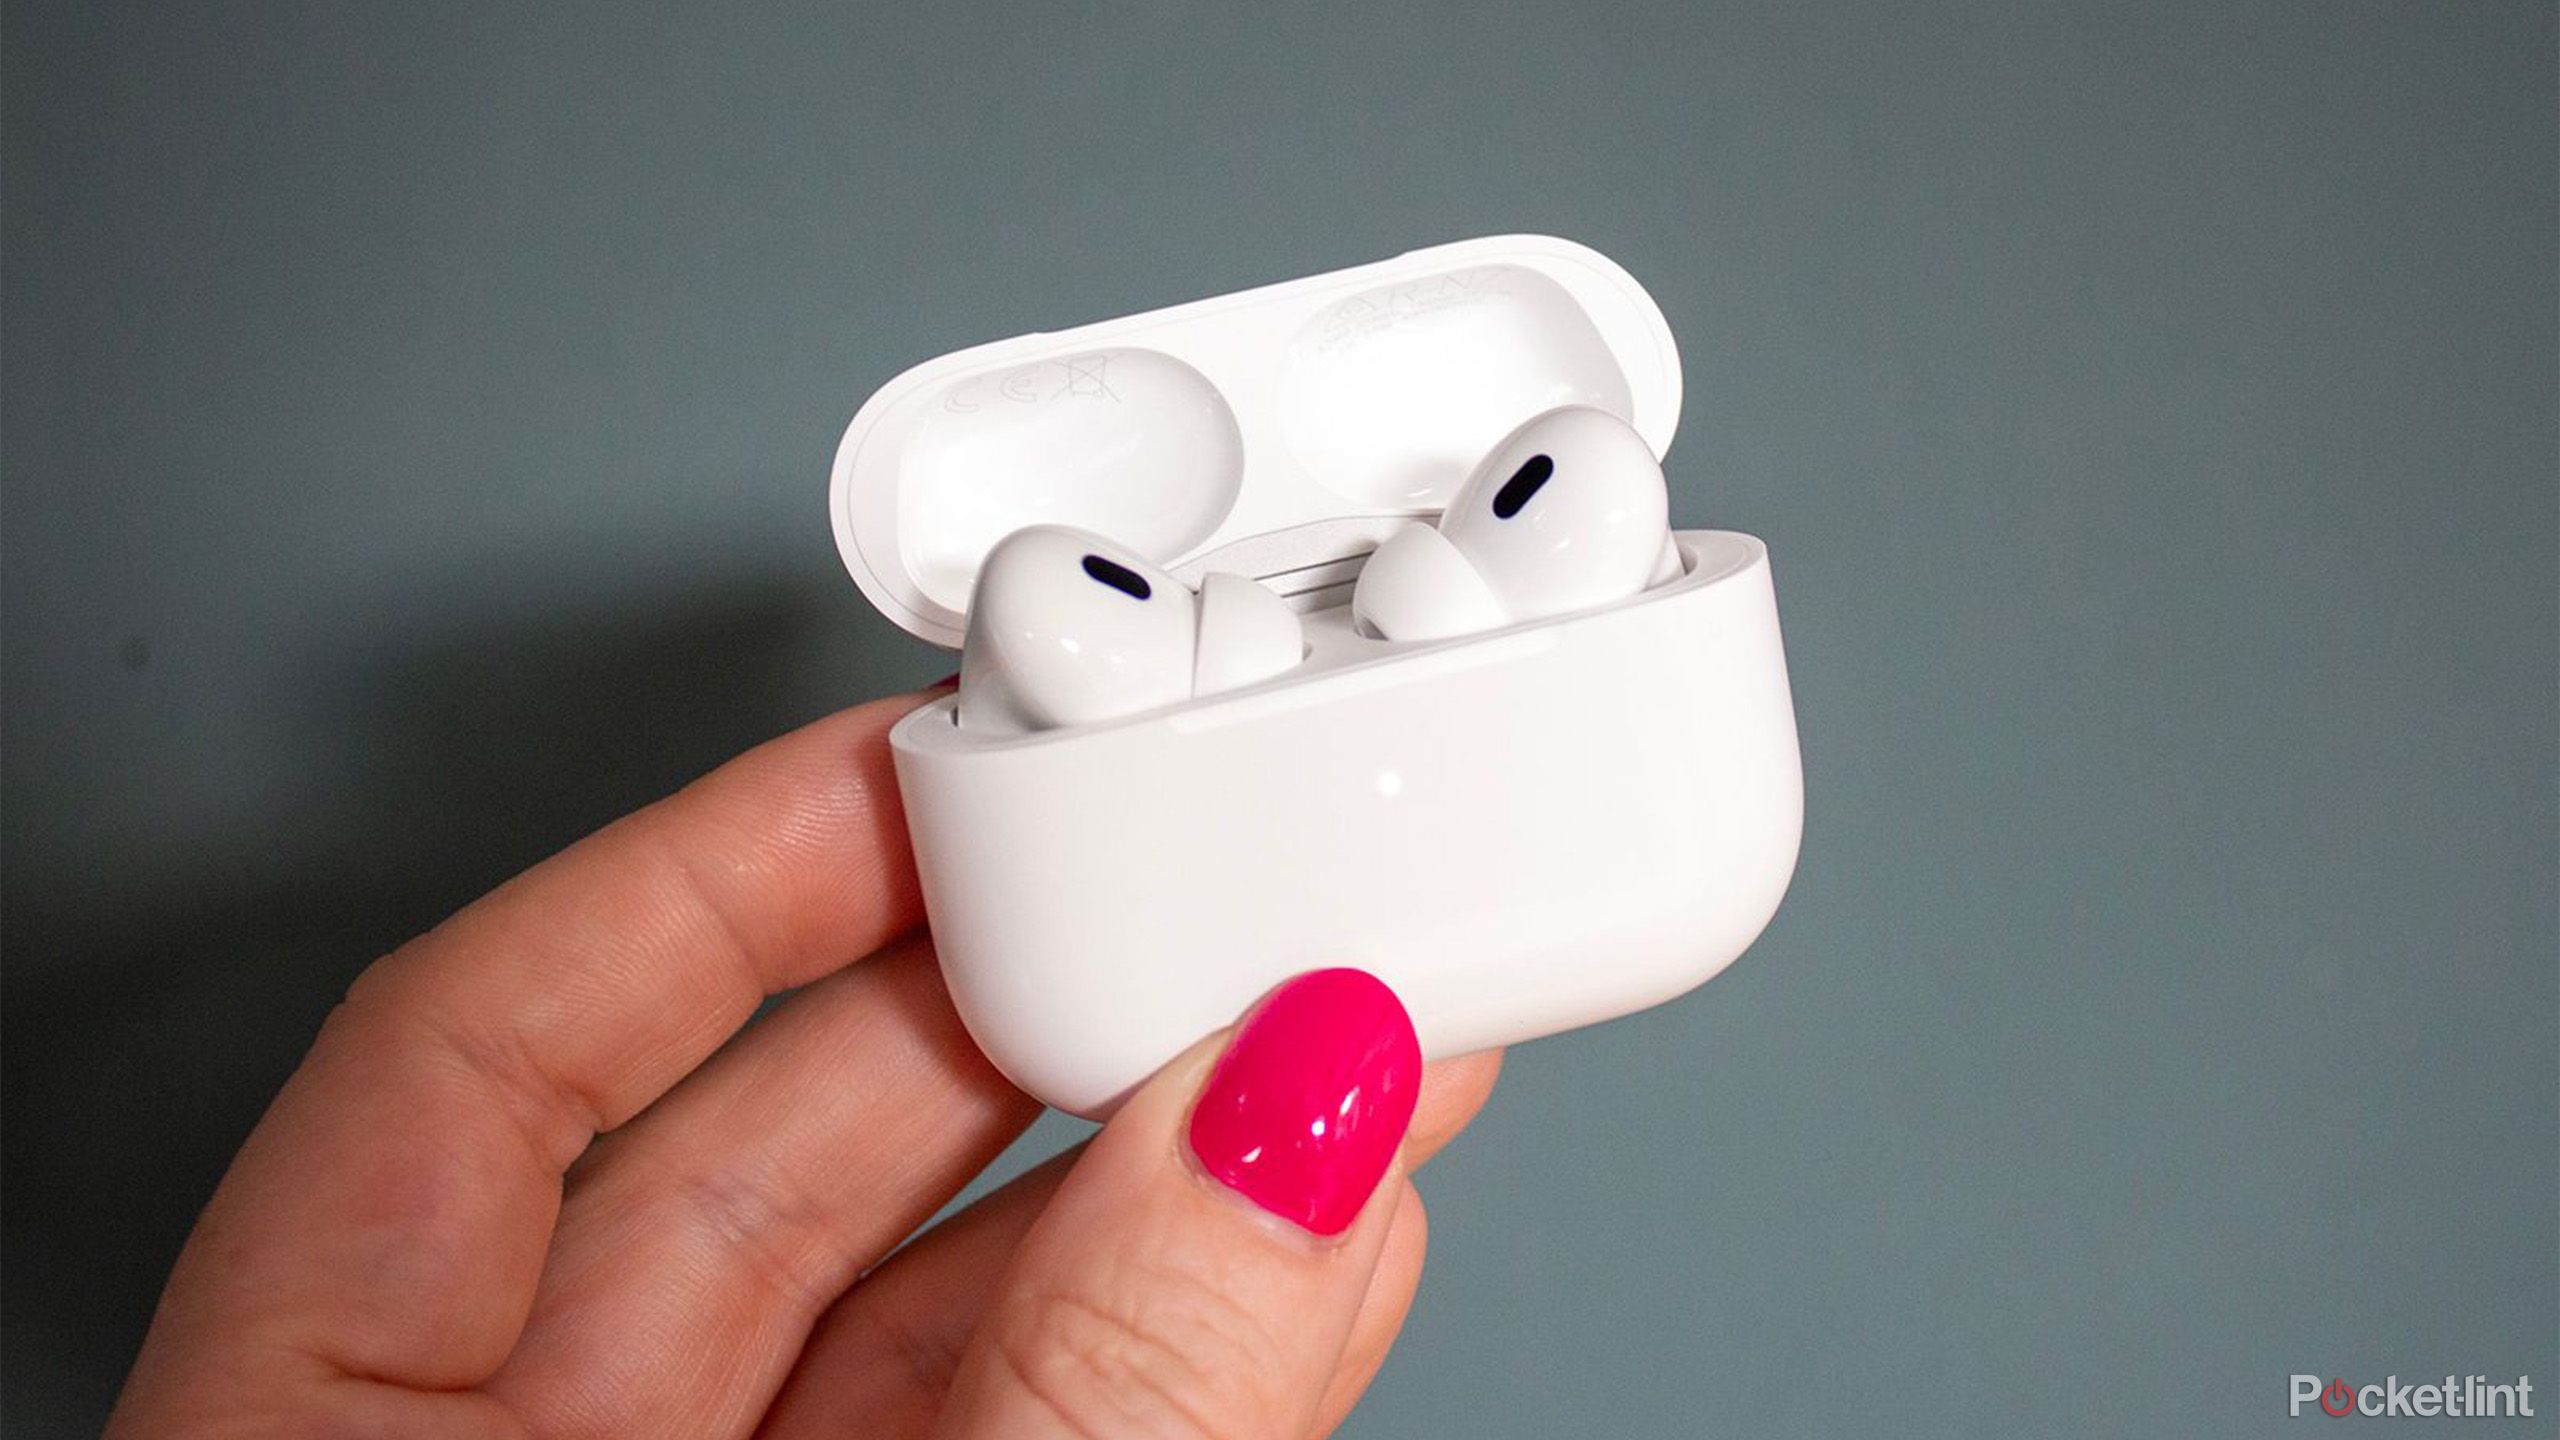 Apple AirPods Pro USB-C 2nd Generation - 10